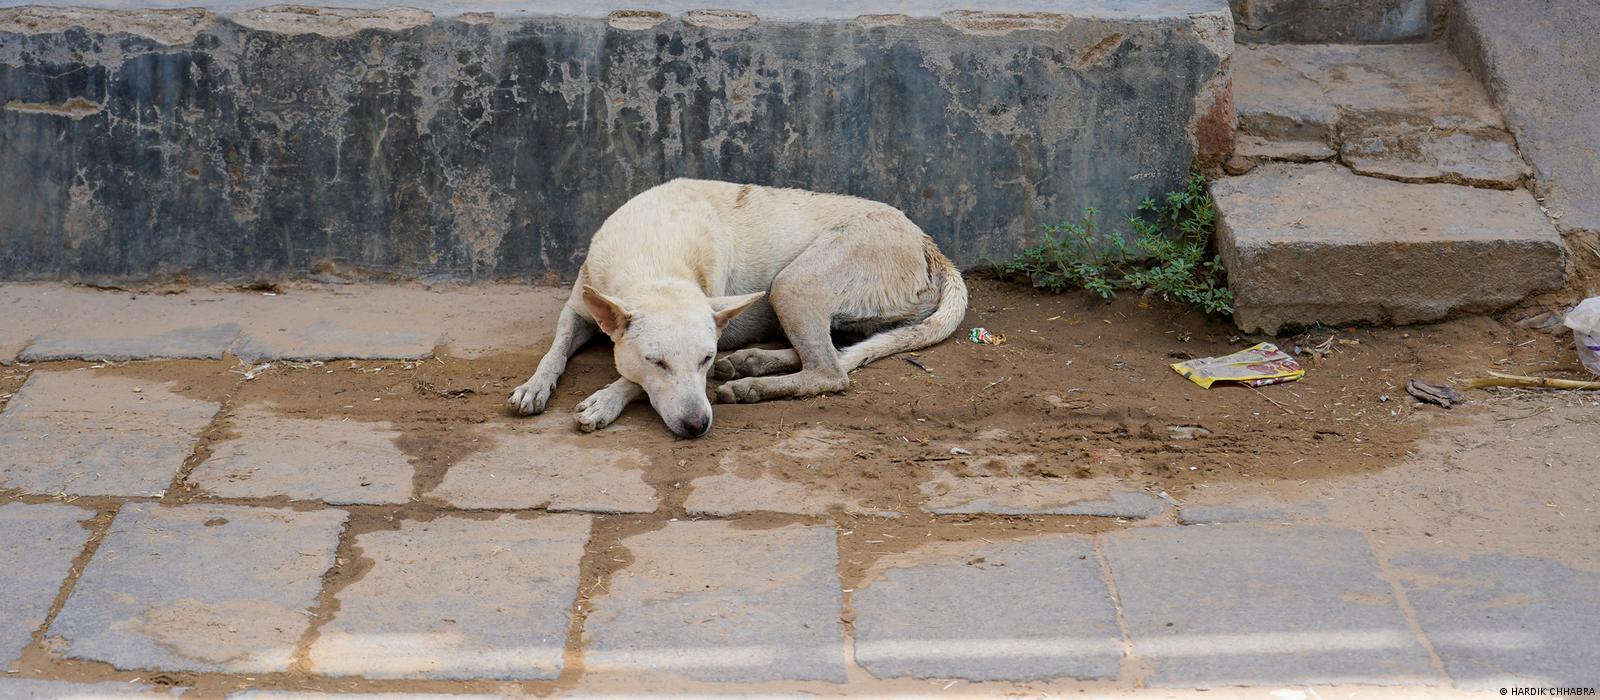 India's stray animals suffer under record heat – DW – 06/23/2022